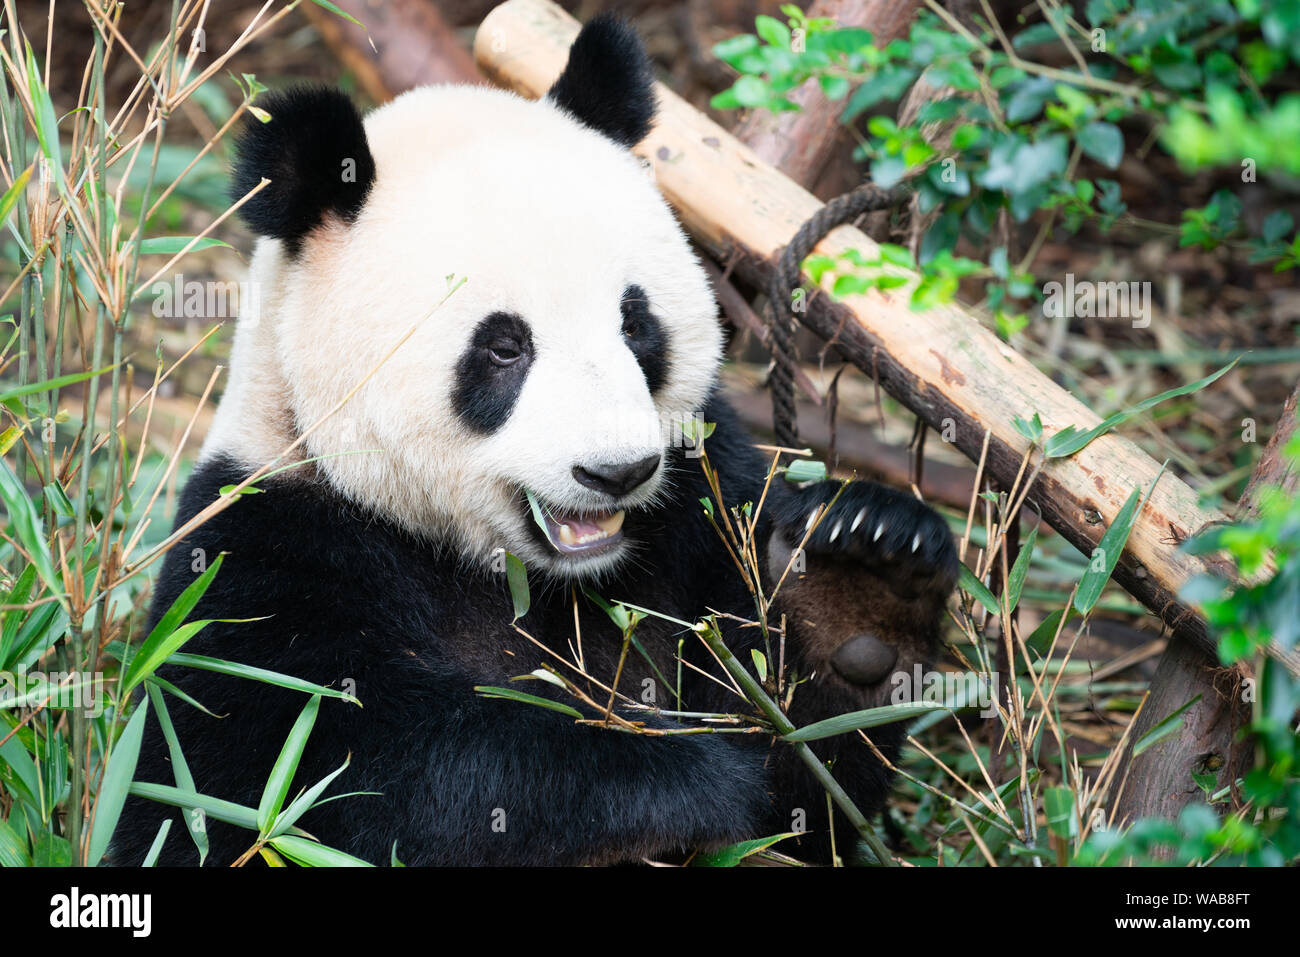 Portait of a Giant Panda eating bamboo leaves with mouth open showing his tooth in Chengdu Sichuan China Stock Photo